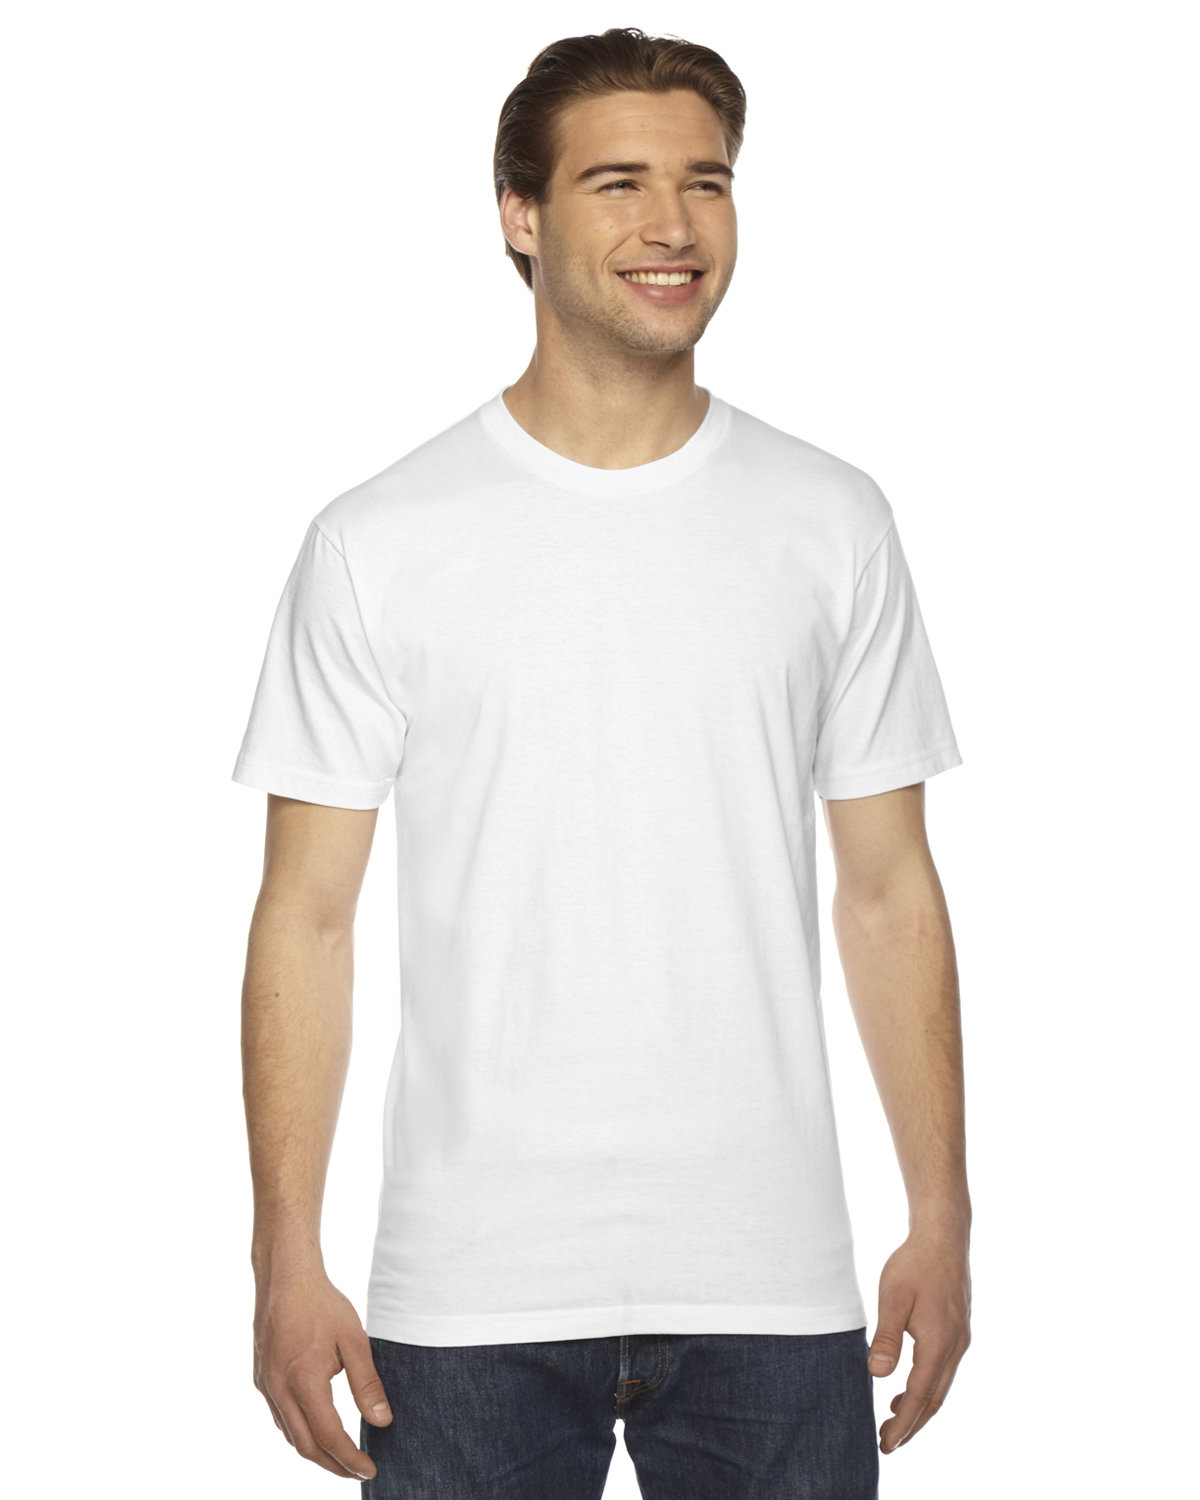 Picture of American Apparel Unisex Fine Jersey Short Sleeve T-Shirt